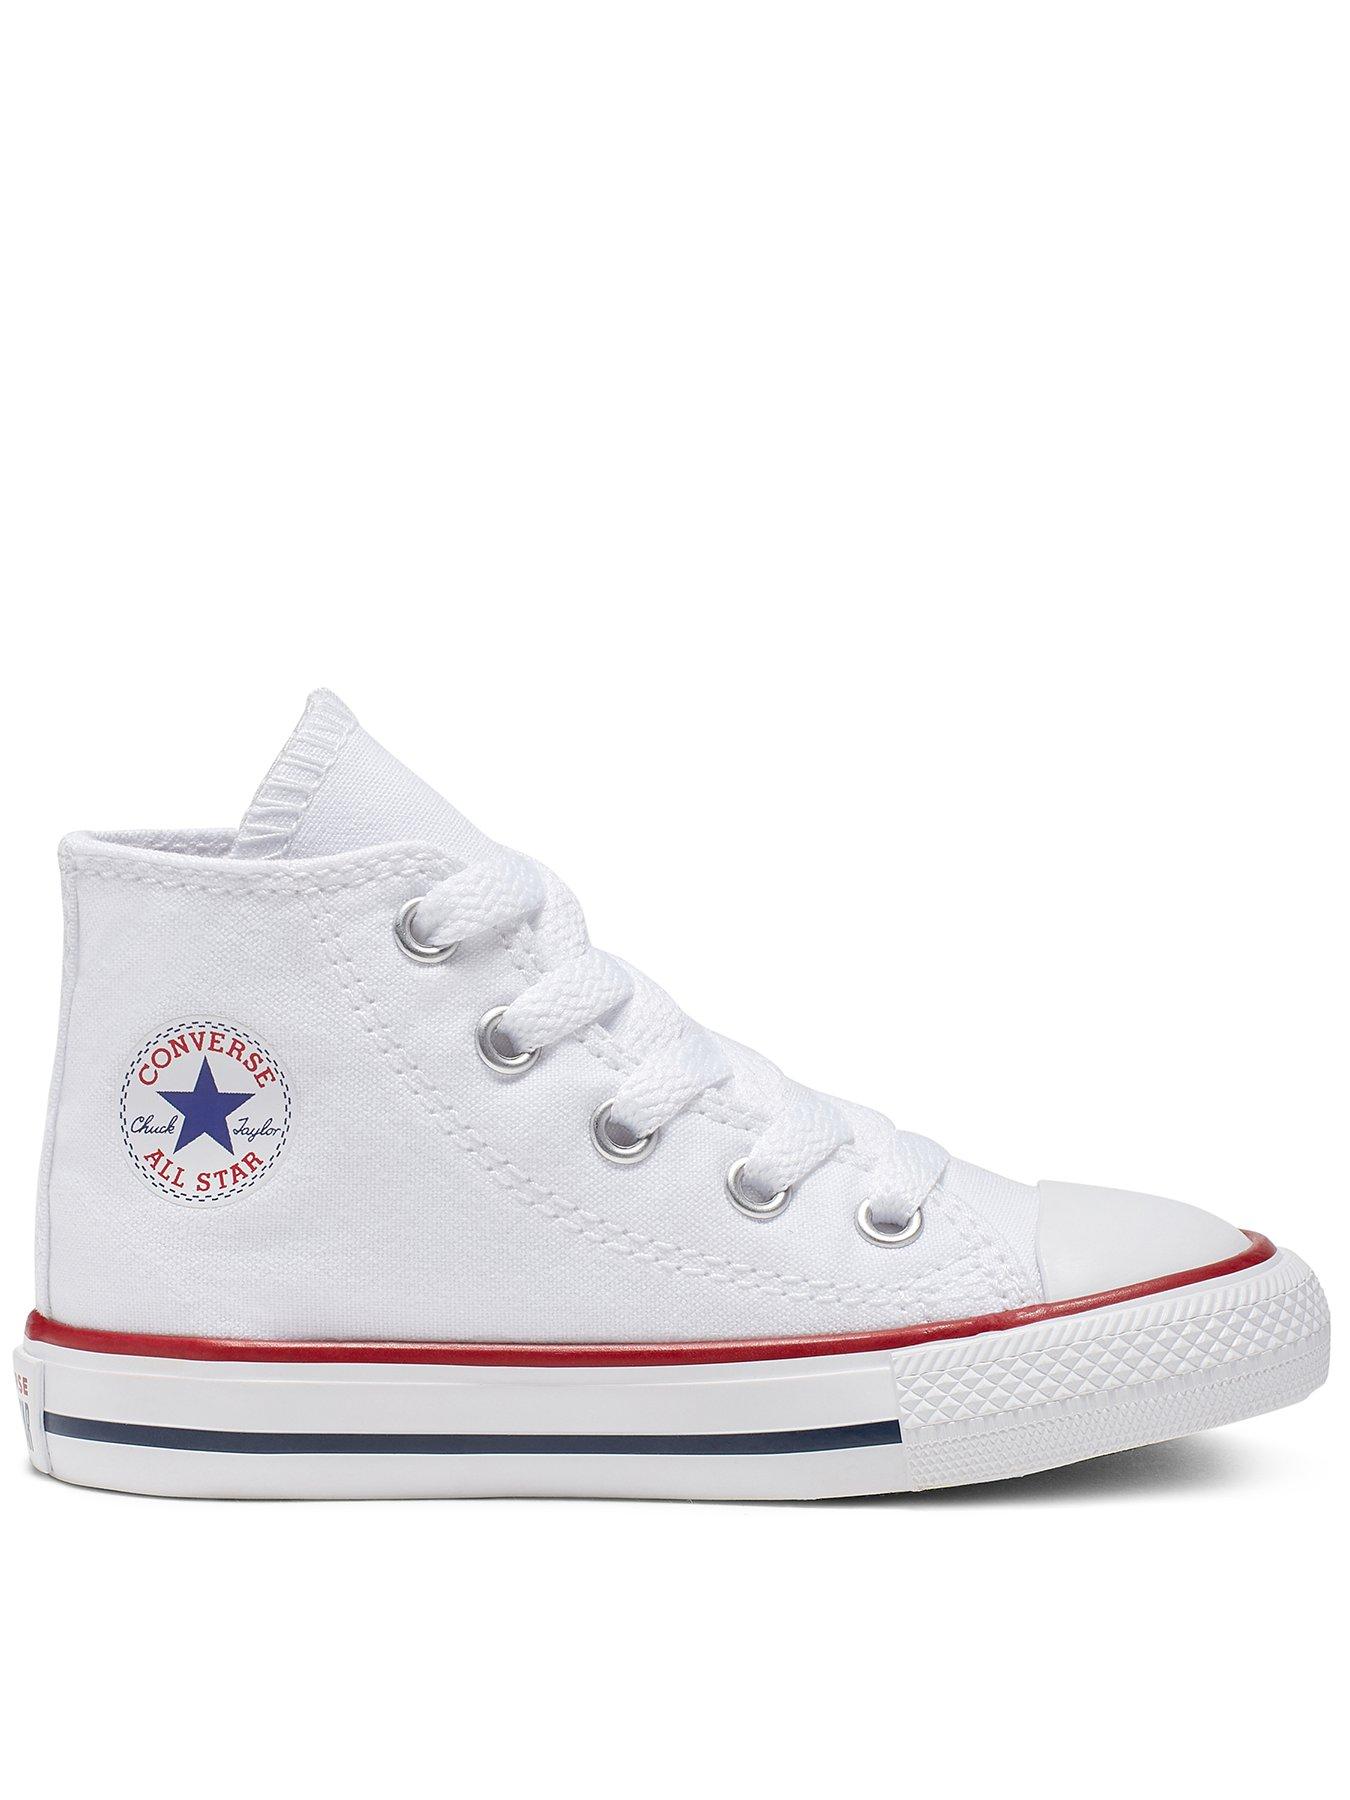 infant converse high top